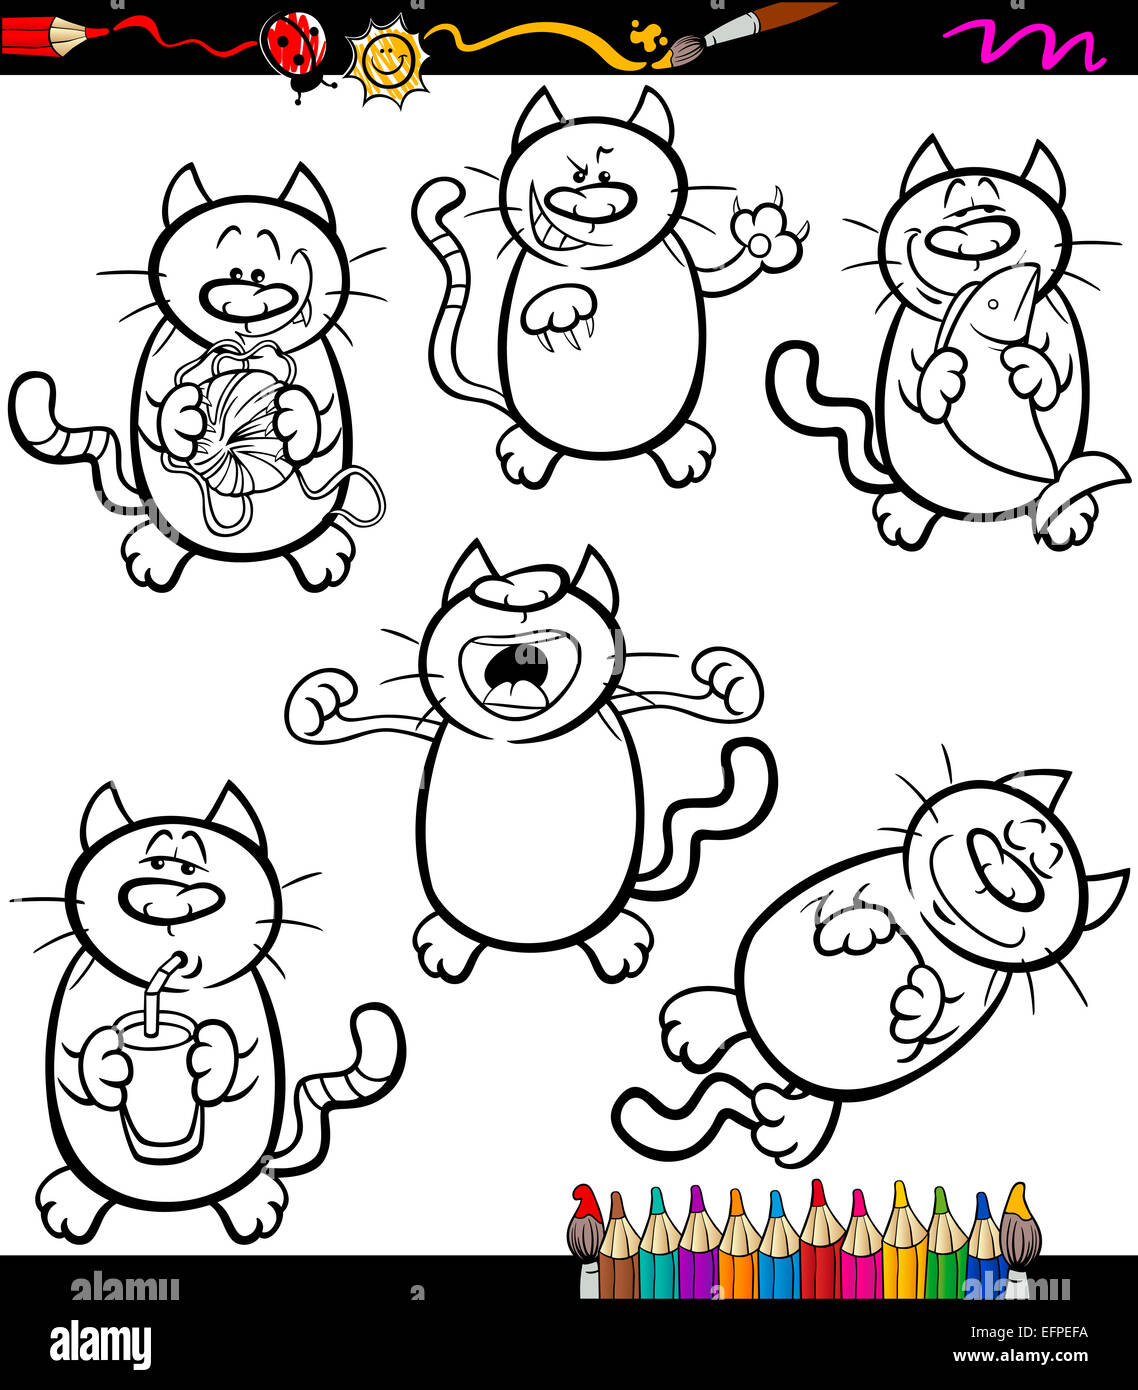 Coloring Book or Page Cartoon Illustration of Black and White Funny Cats Set Stock Photo